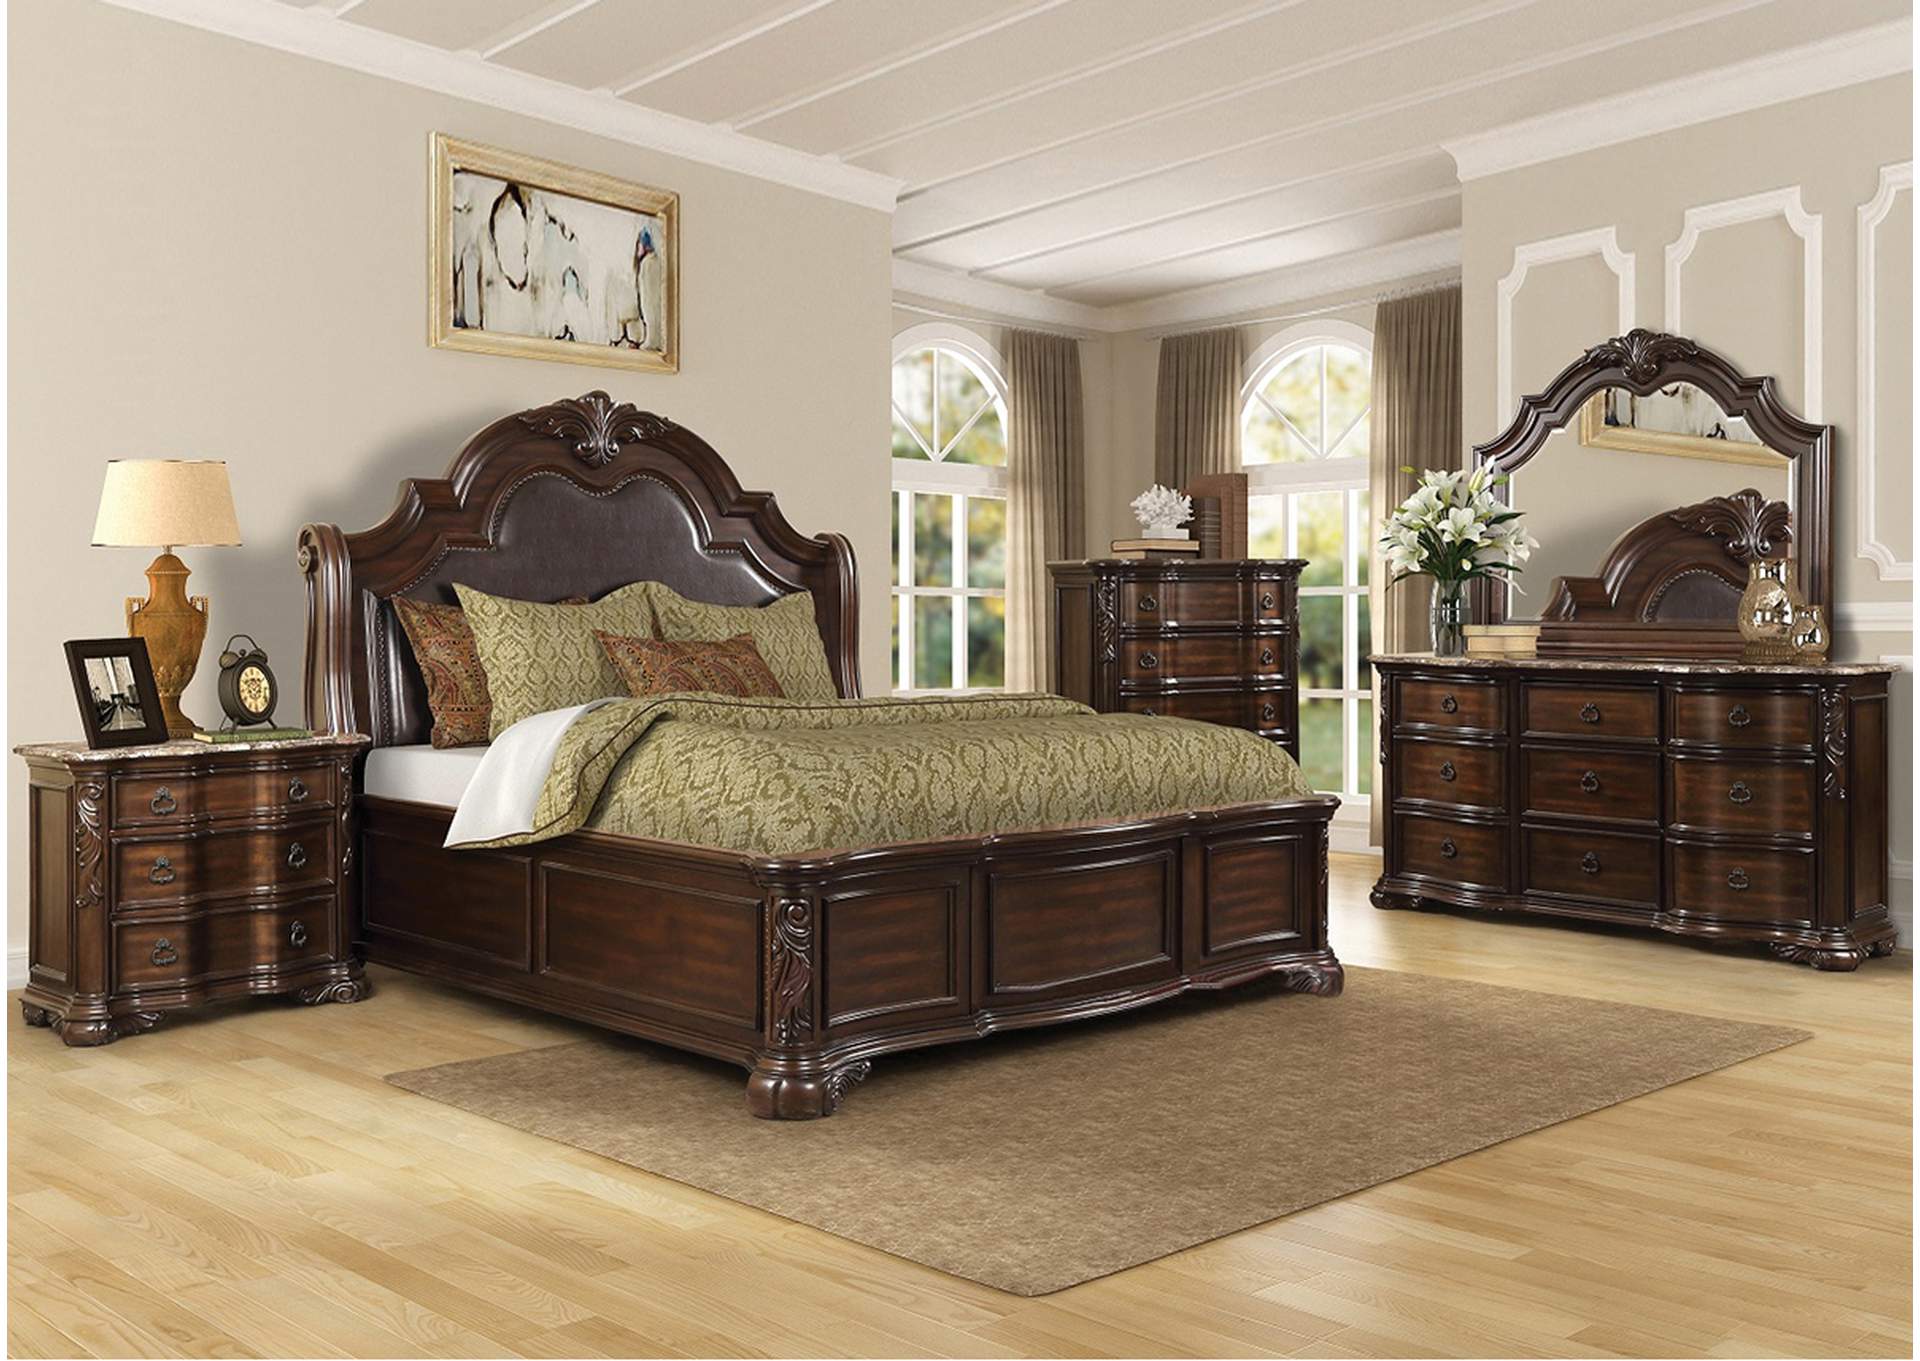 B102 King Bed,Nationwide